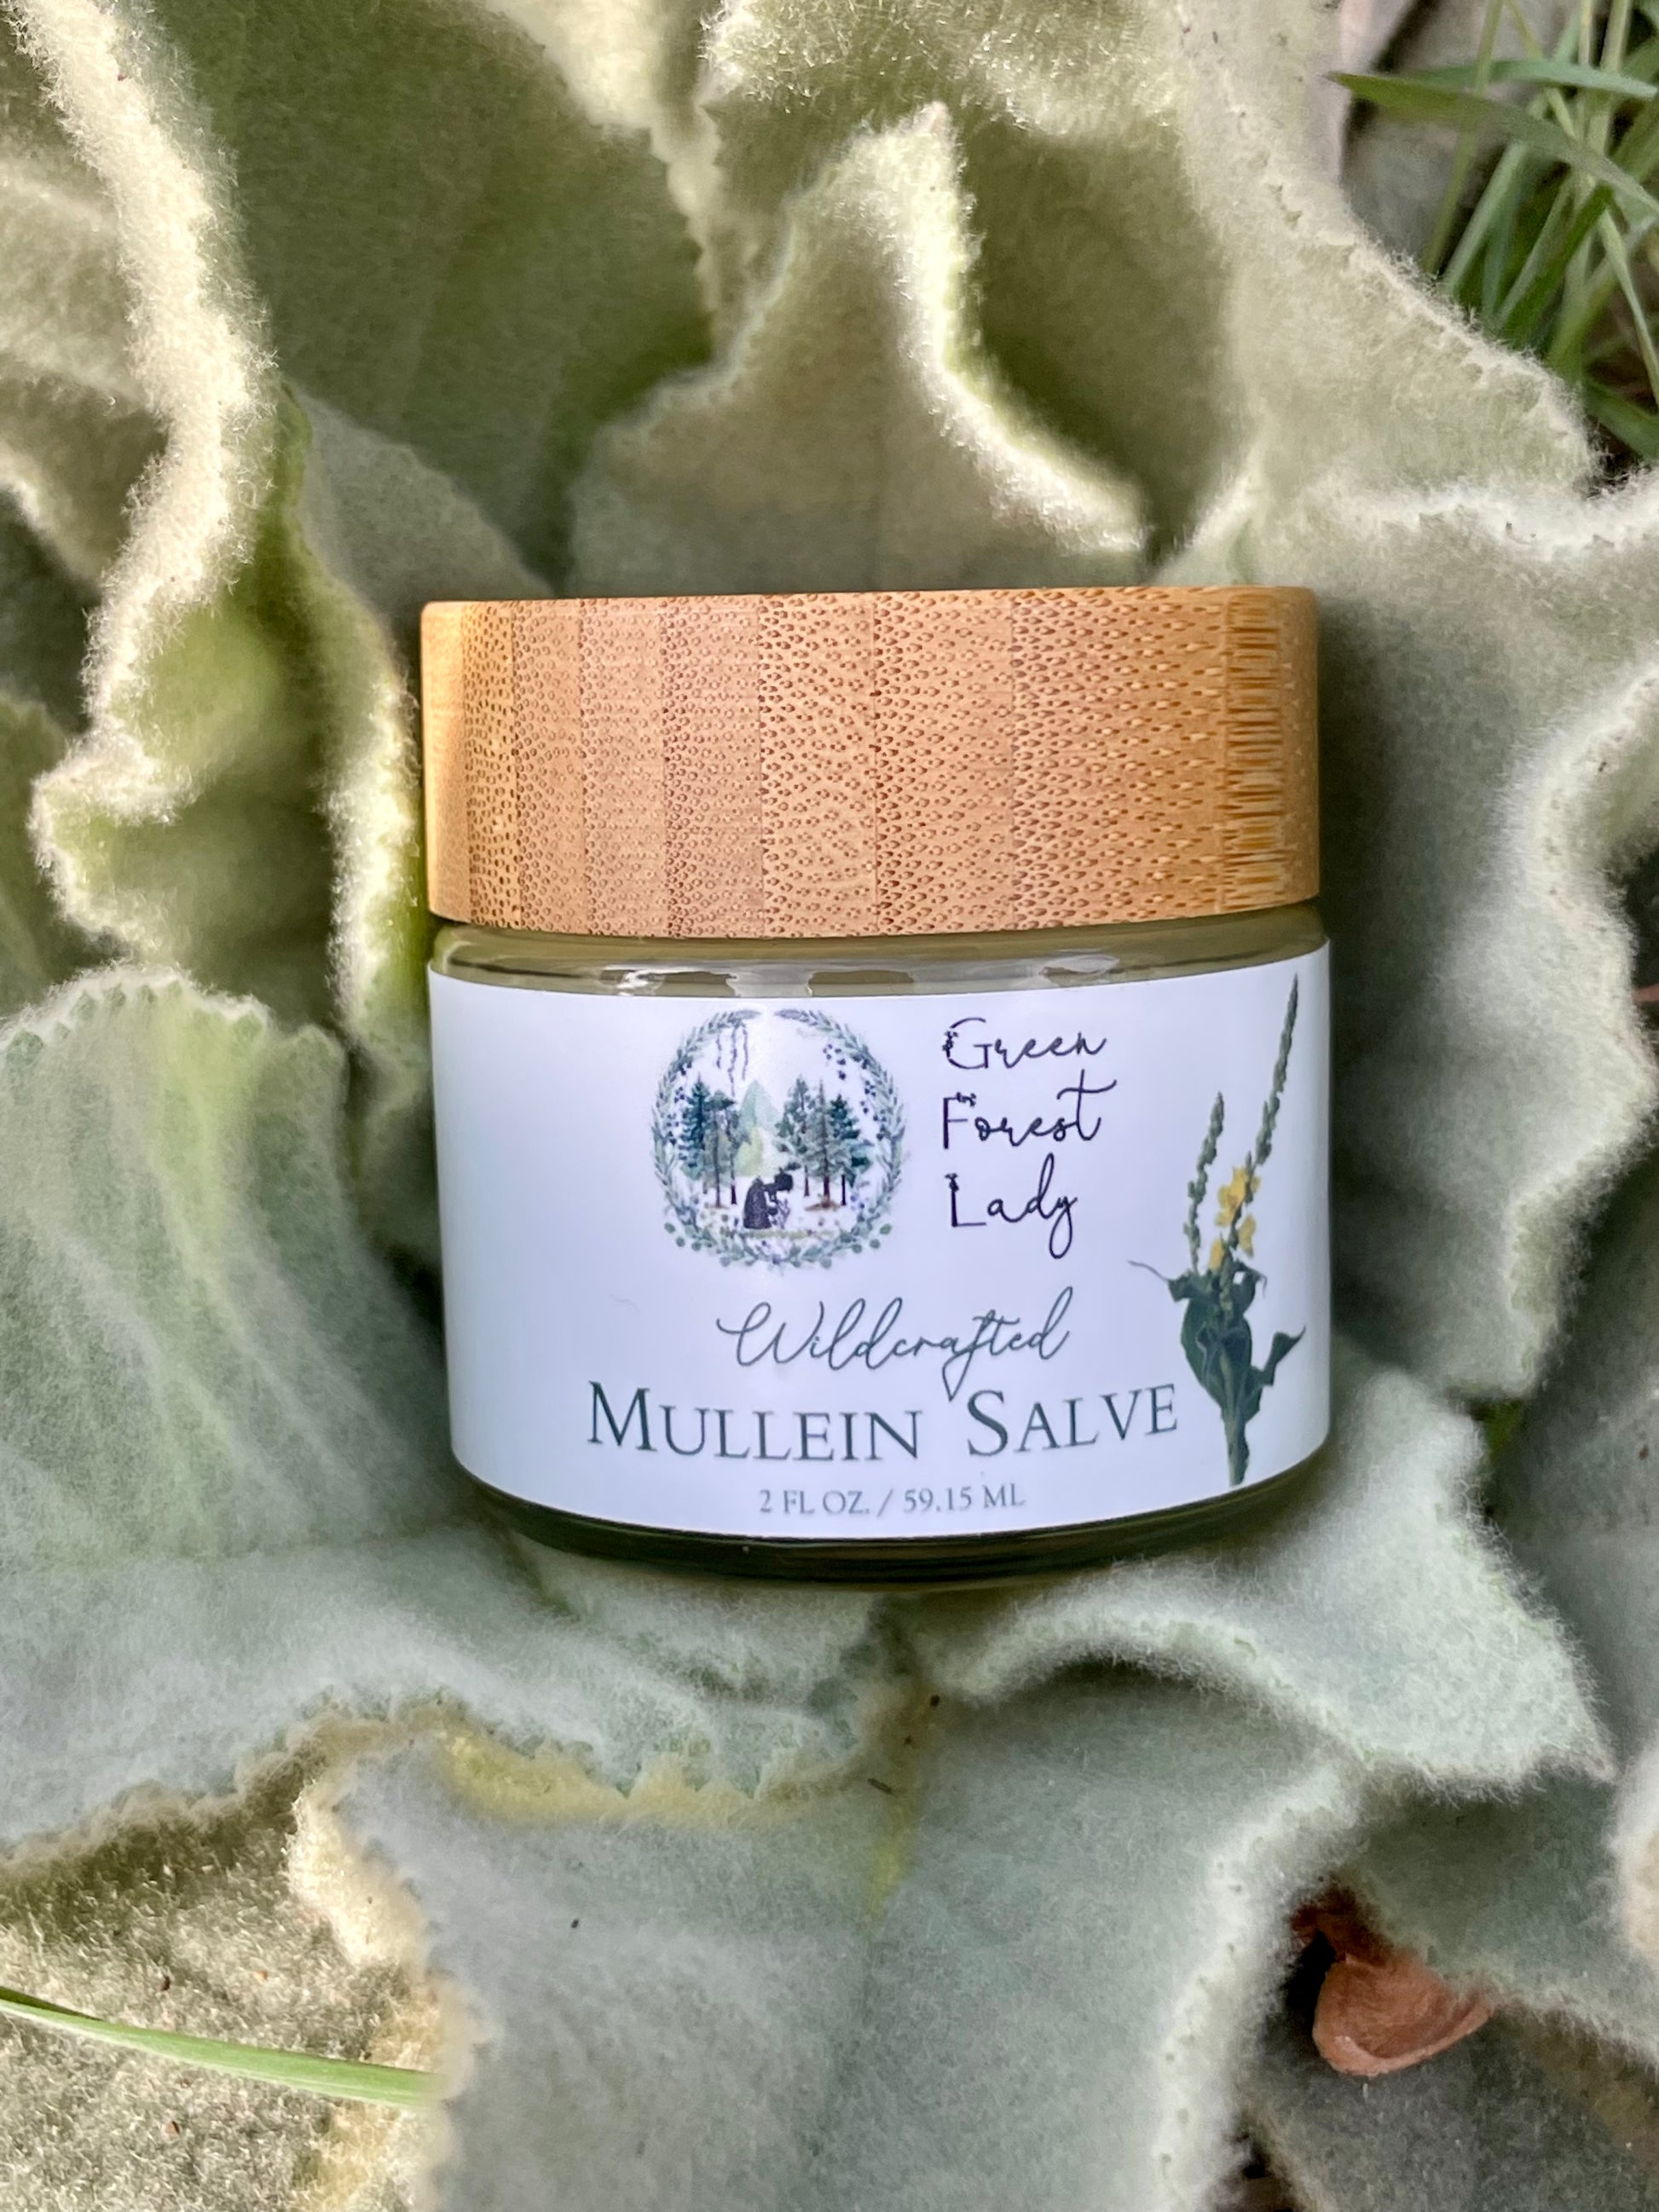 Mullein salve in a glass jar on top of mullein leaves